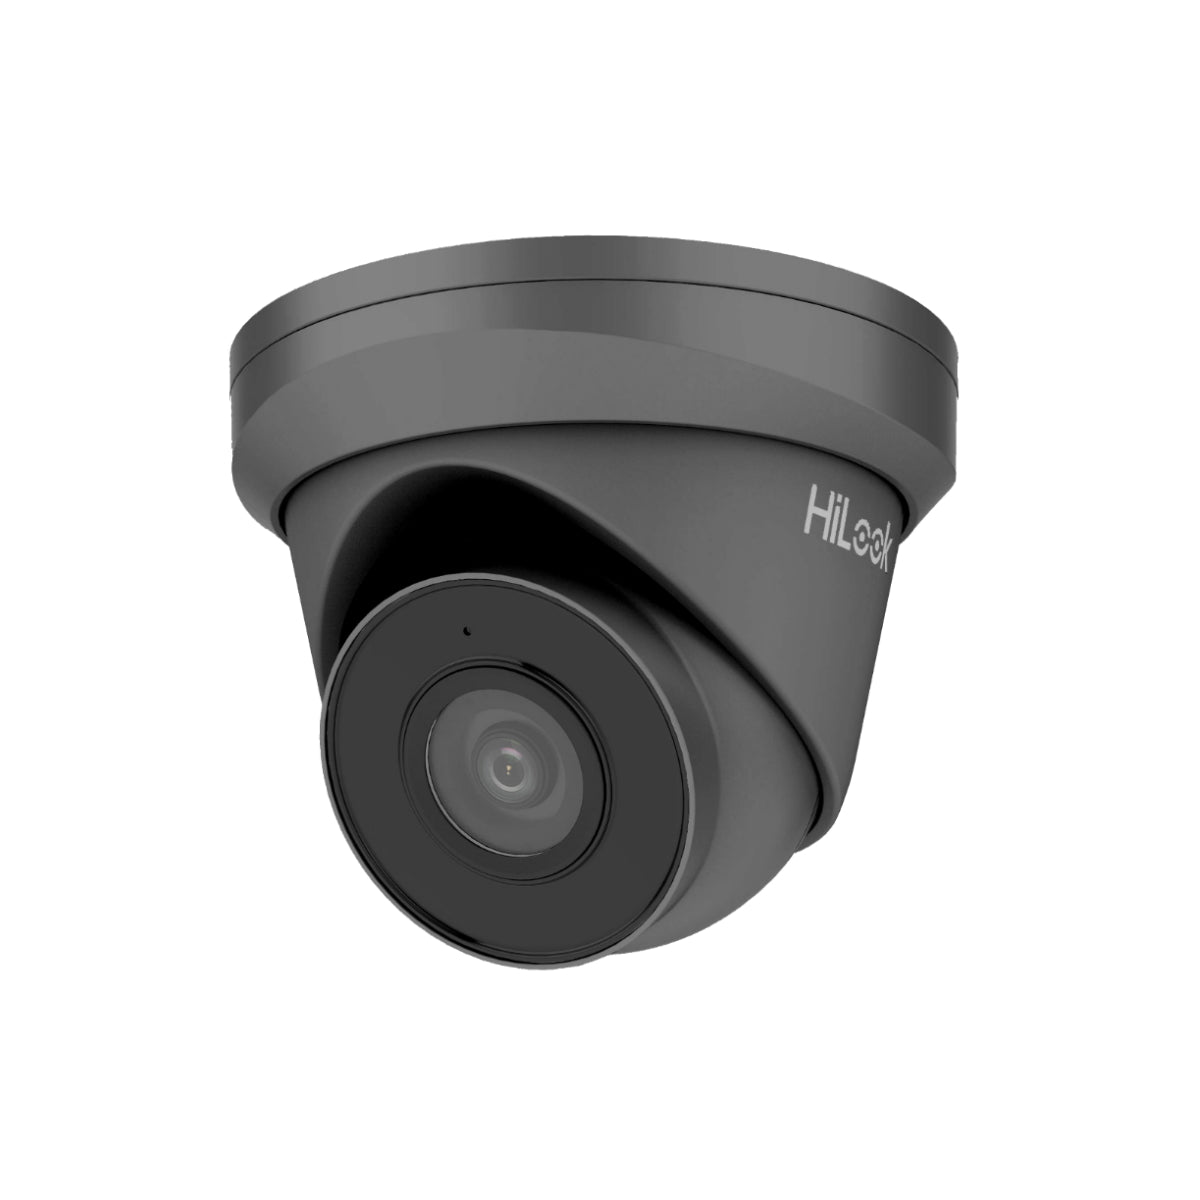 IPC-T280H-MUF 2.8mm HiLook 8MP 4k ultra HD IP POE network turret camera, 30m IR, built-in microphone in white or grey